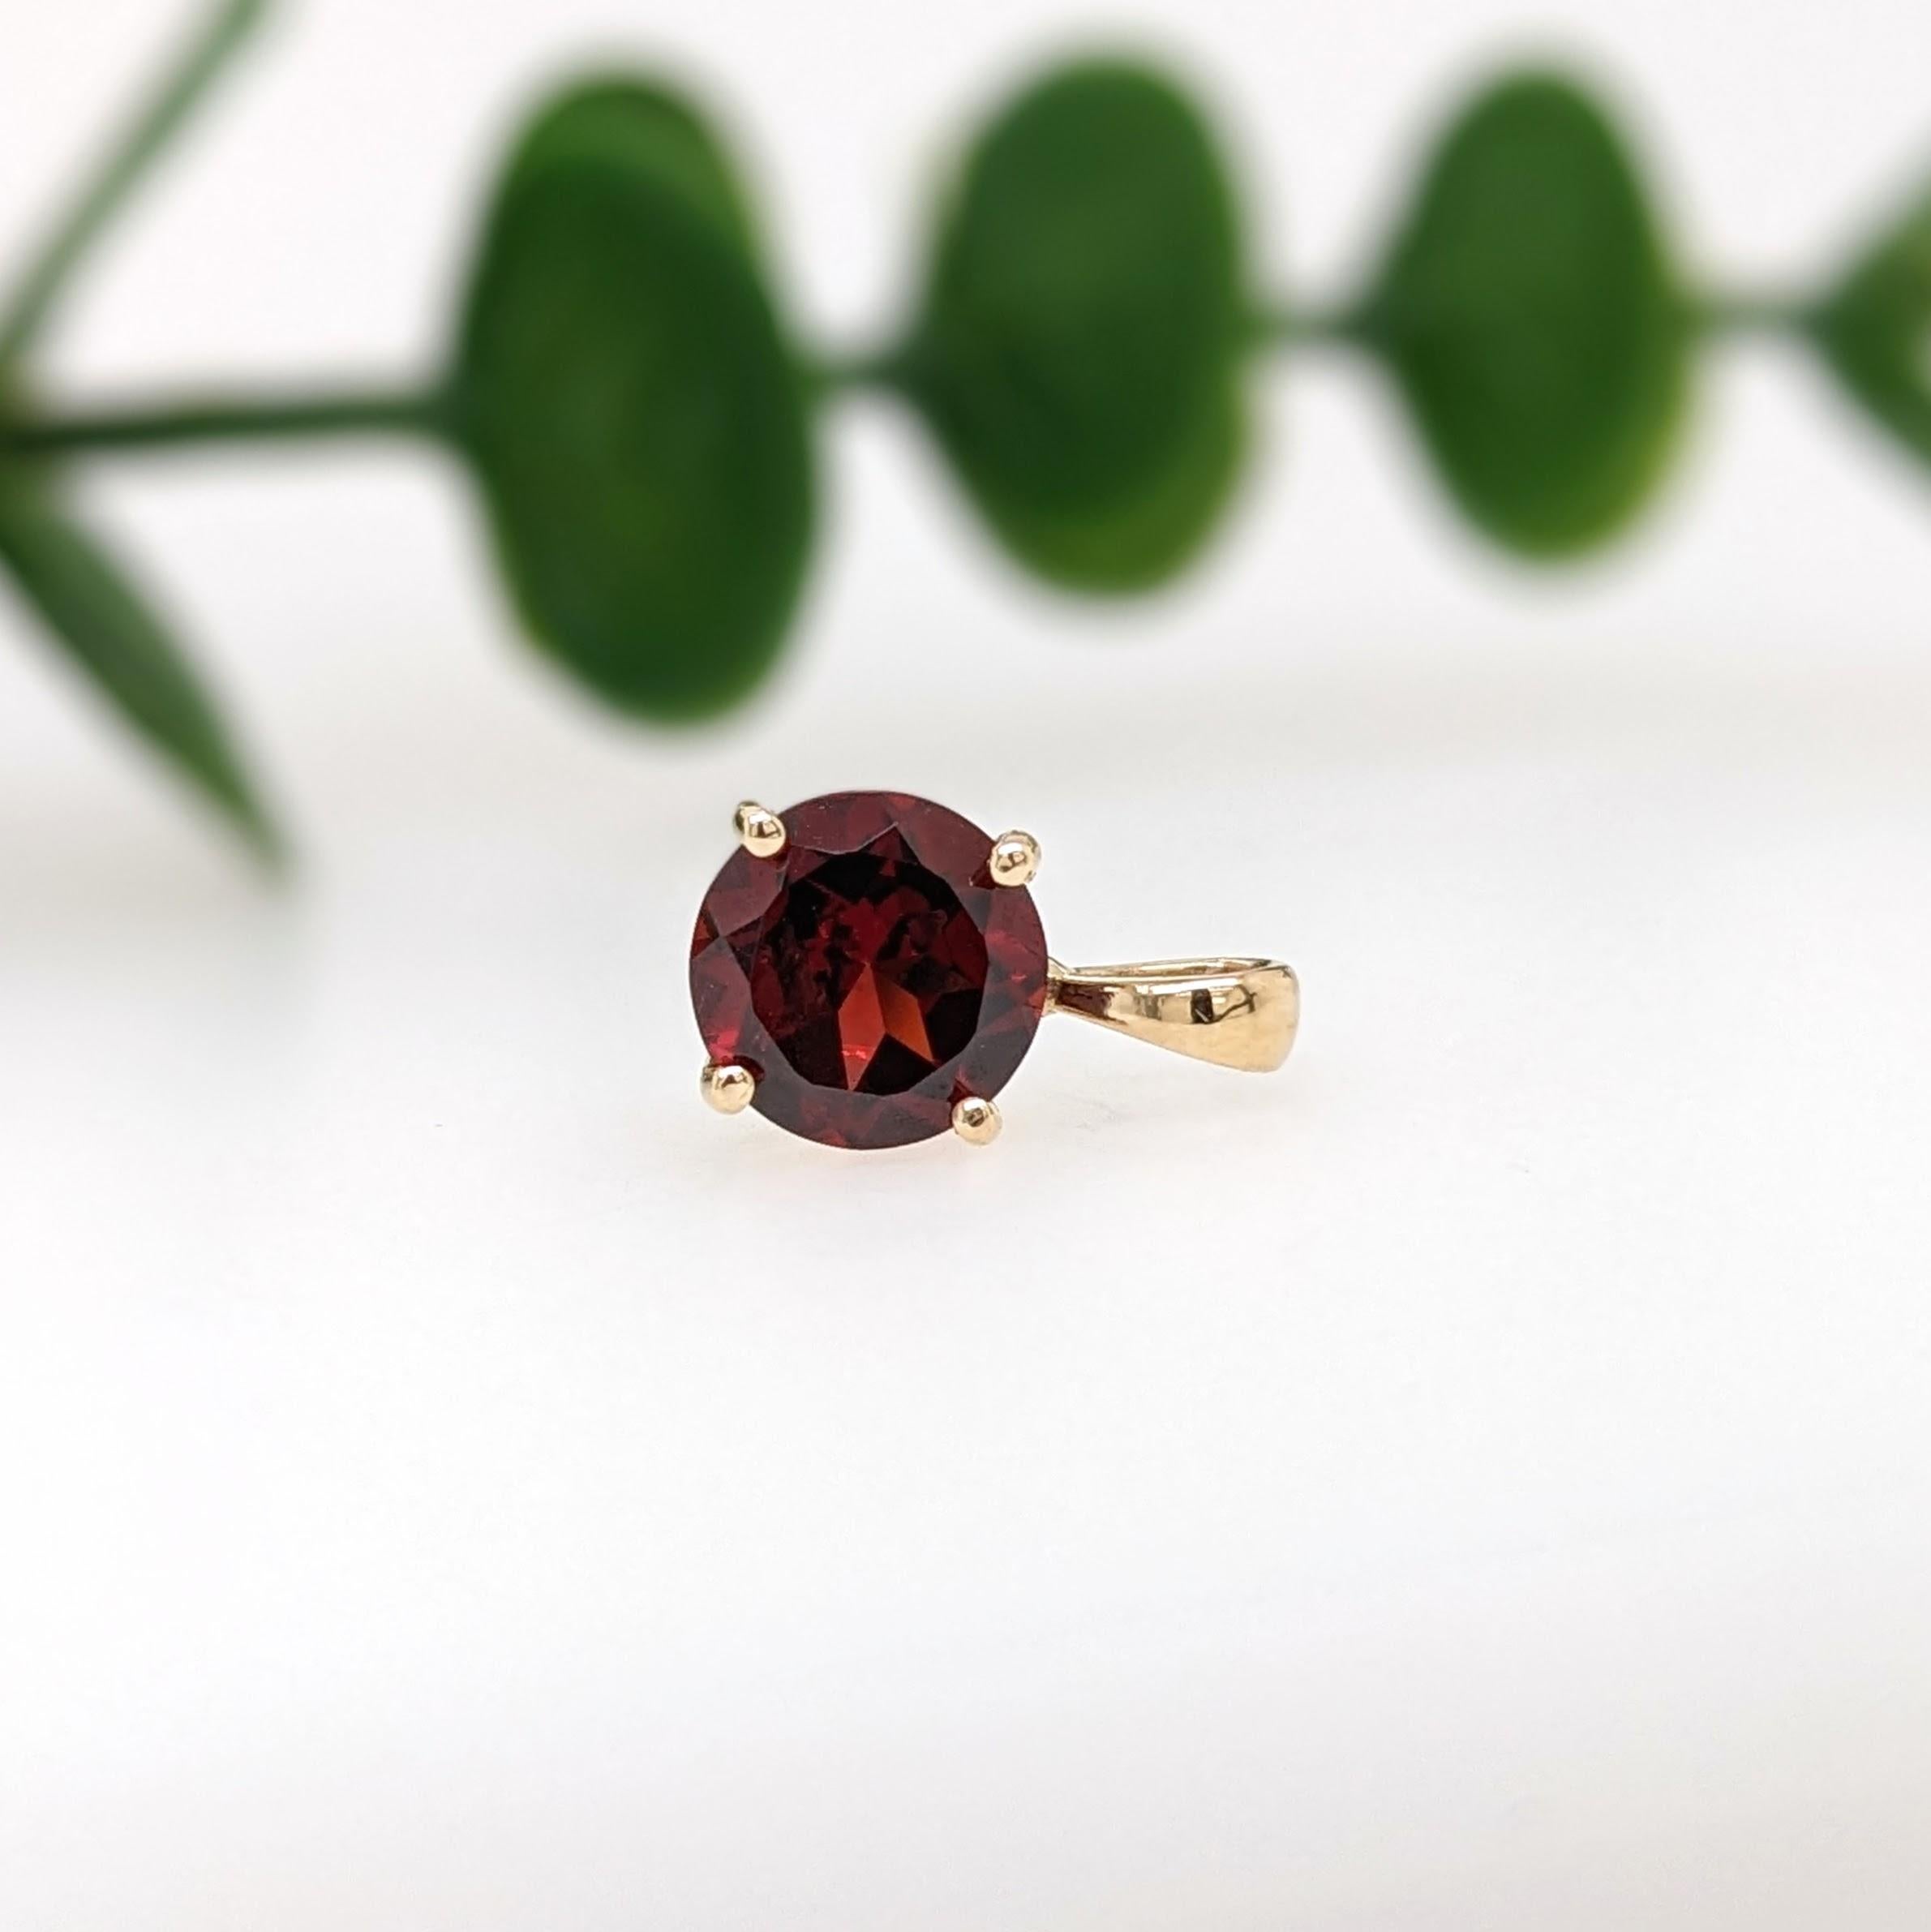 Round Cut 2.2ct Red Garnet Solitaire Pendant in Solid 14K Yellow Gold Round 8mm For Sale